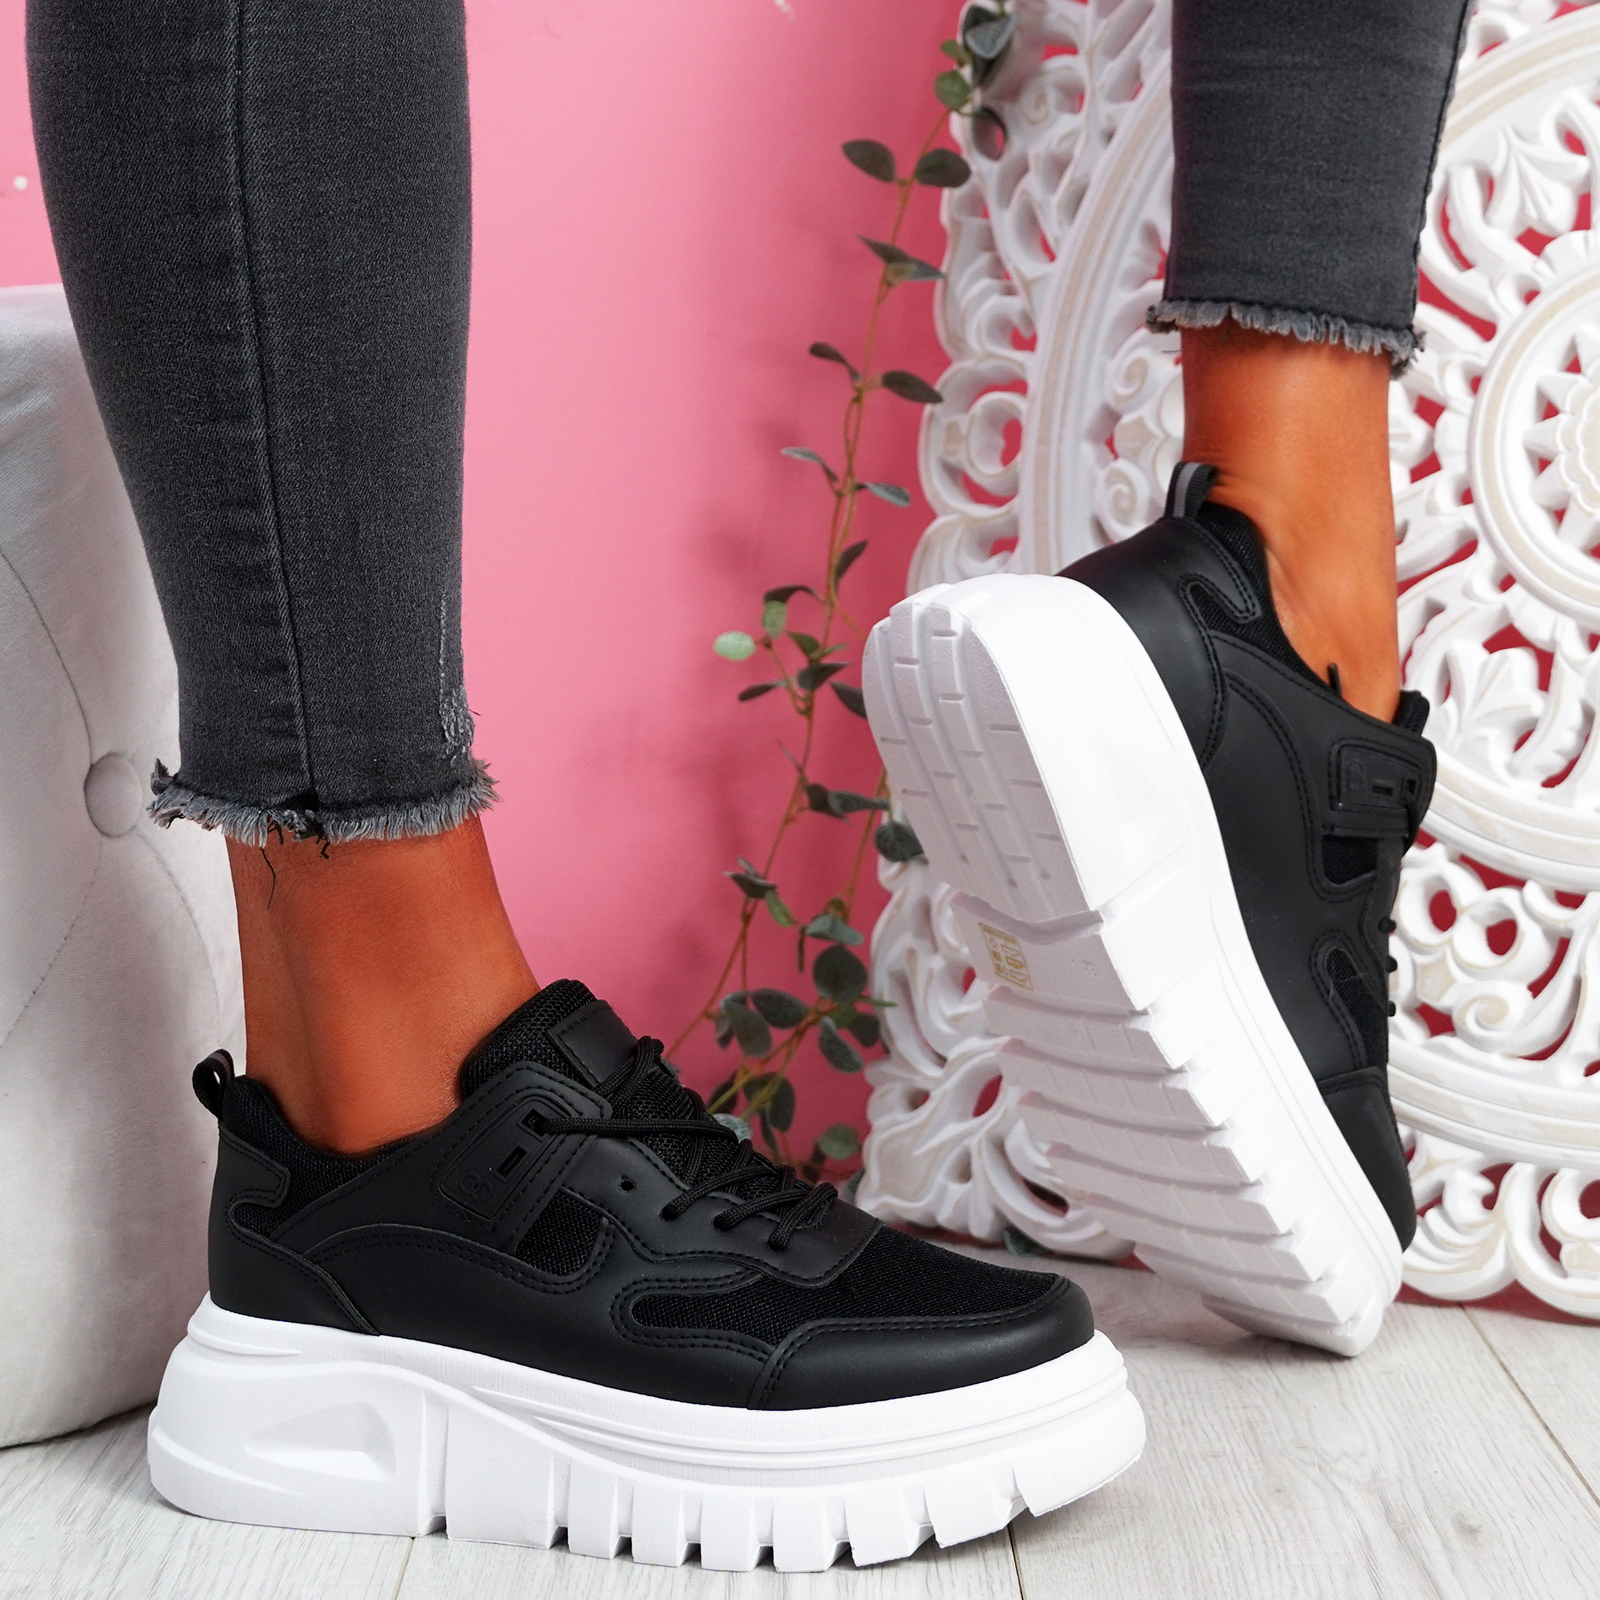 Ladies Lace Up Trainers Chunky Heel High Platform Sneakers Casual Shoes Size 3-8 